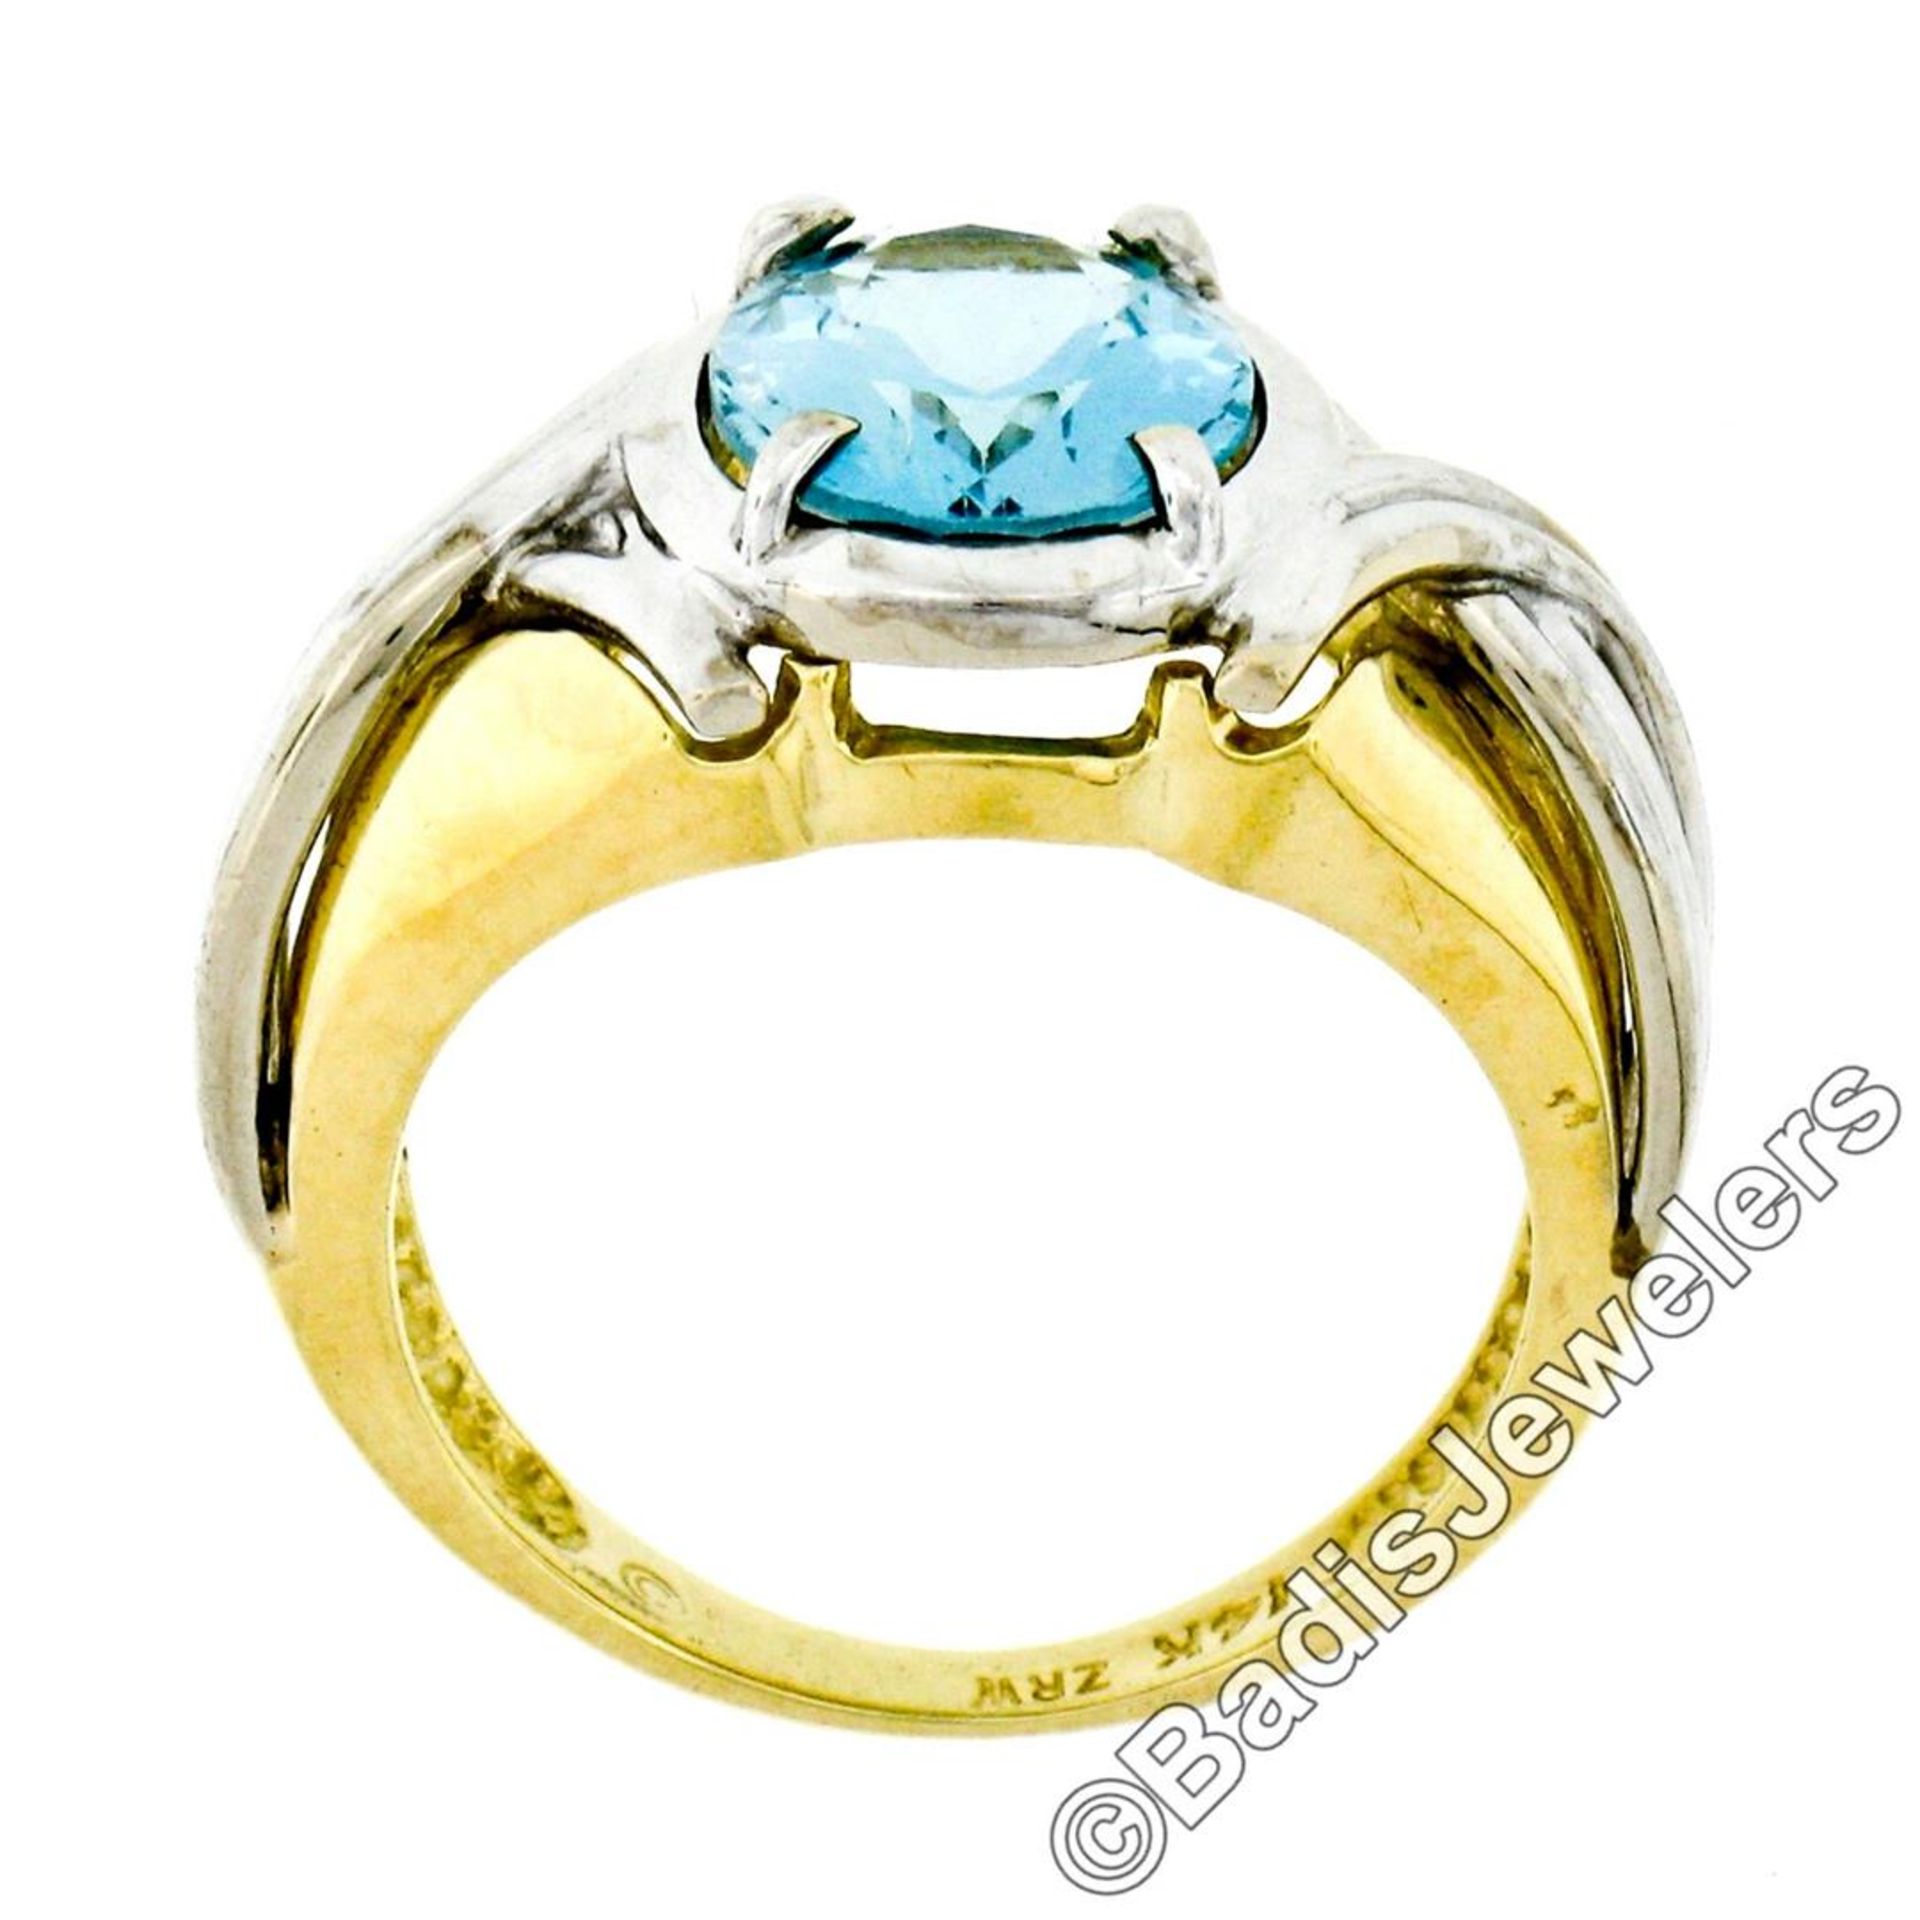 Estate 14kt Two Tone Gold 2.10 ctw Oval Aquamarine Grooved Cocktail Ring - Image 6 of 9